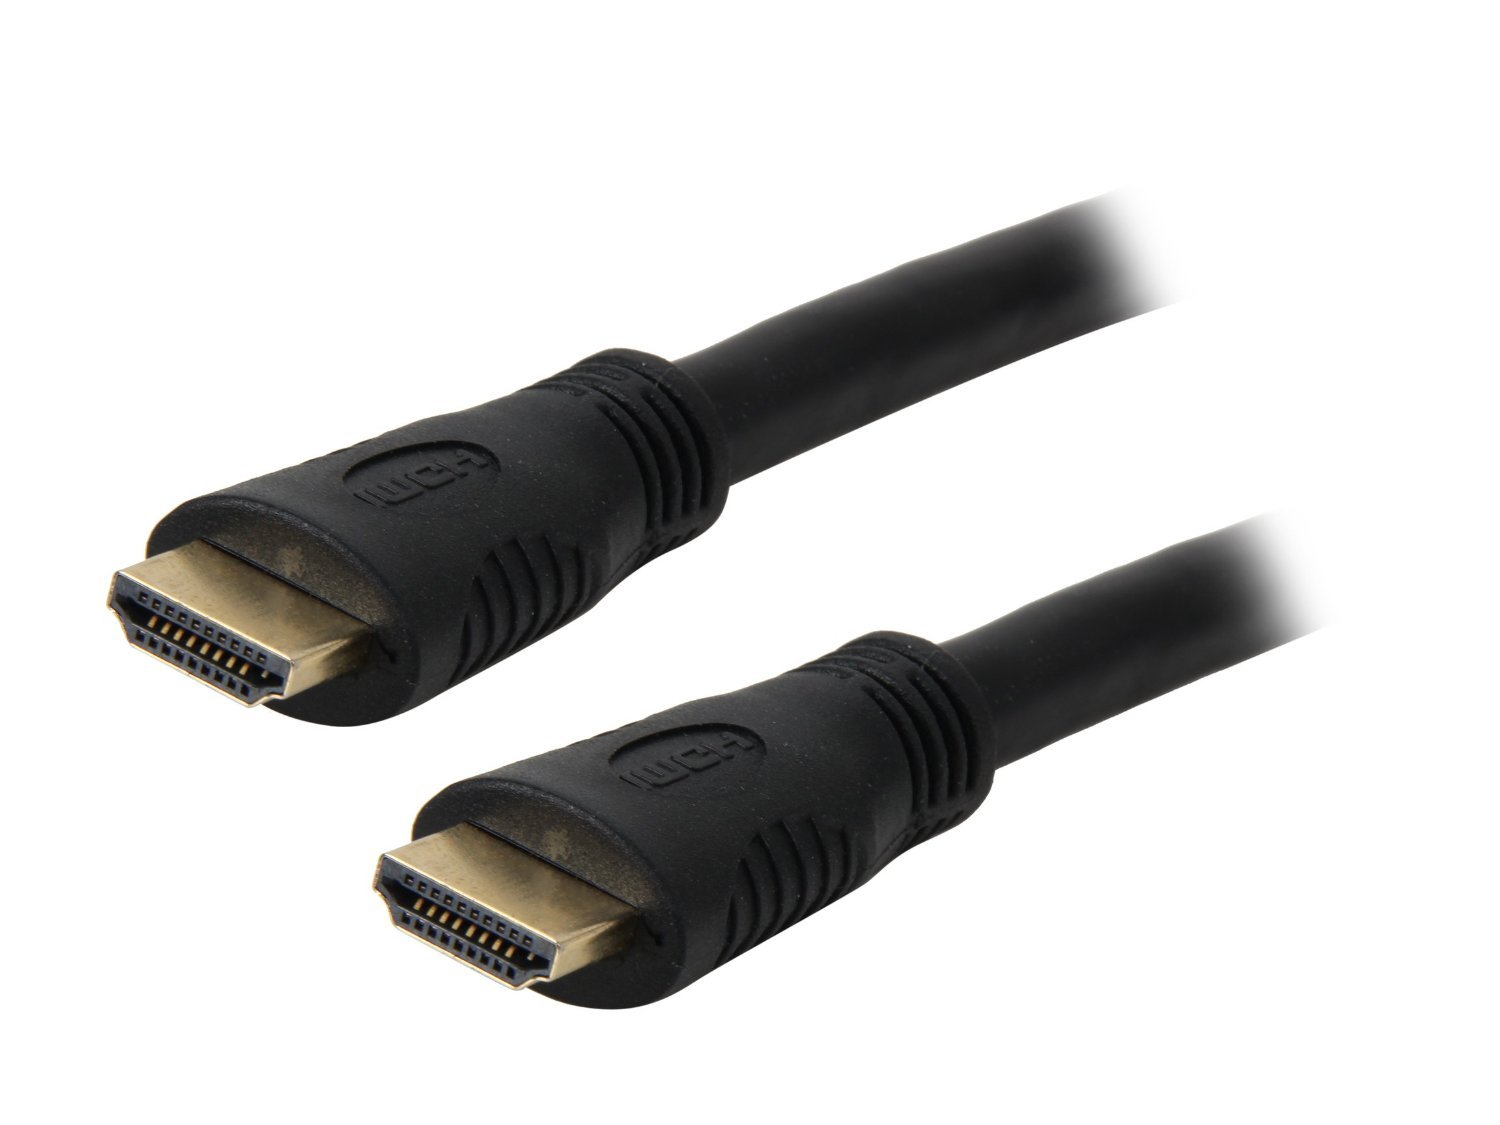 Nippon Labs NMHD-45MM 45-Feet High Speed HDMI with Ethernet CL2 Rating, Black Cable M/M 24 AWG Gold Plated